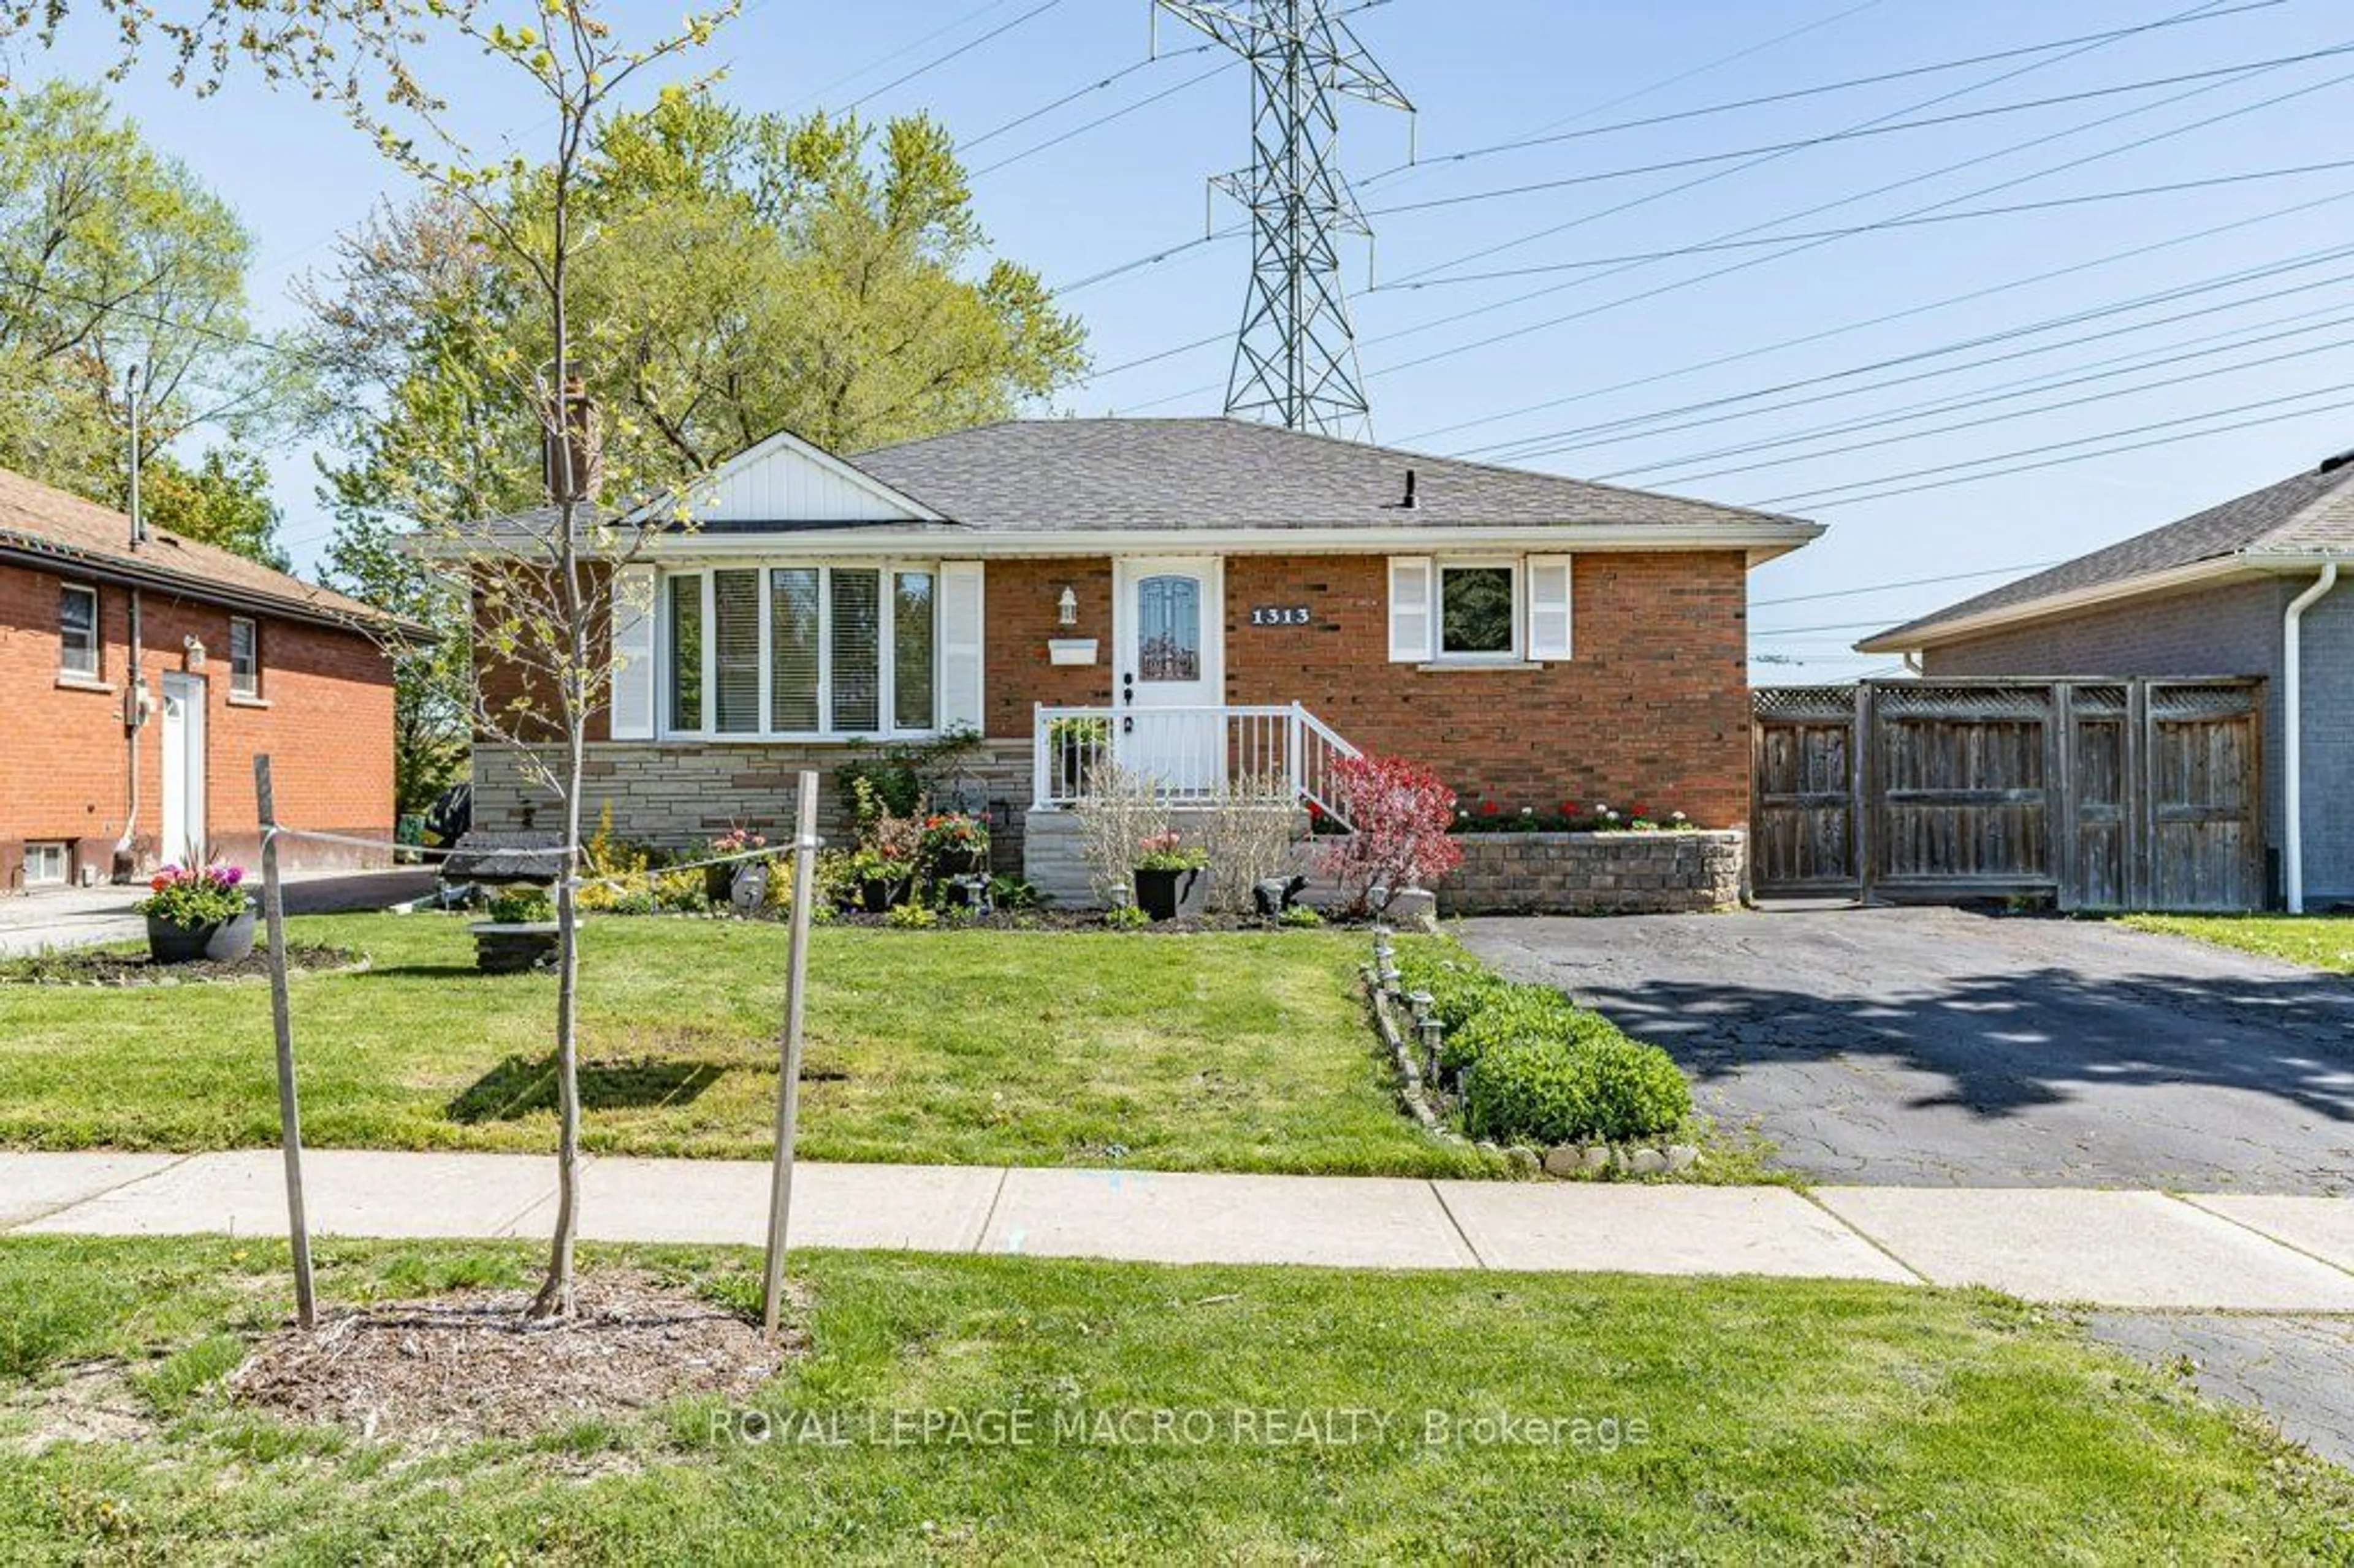 Home with brick exterior material for 1313 Fisher Ave, Burlington Ontario L7P 2L5